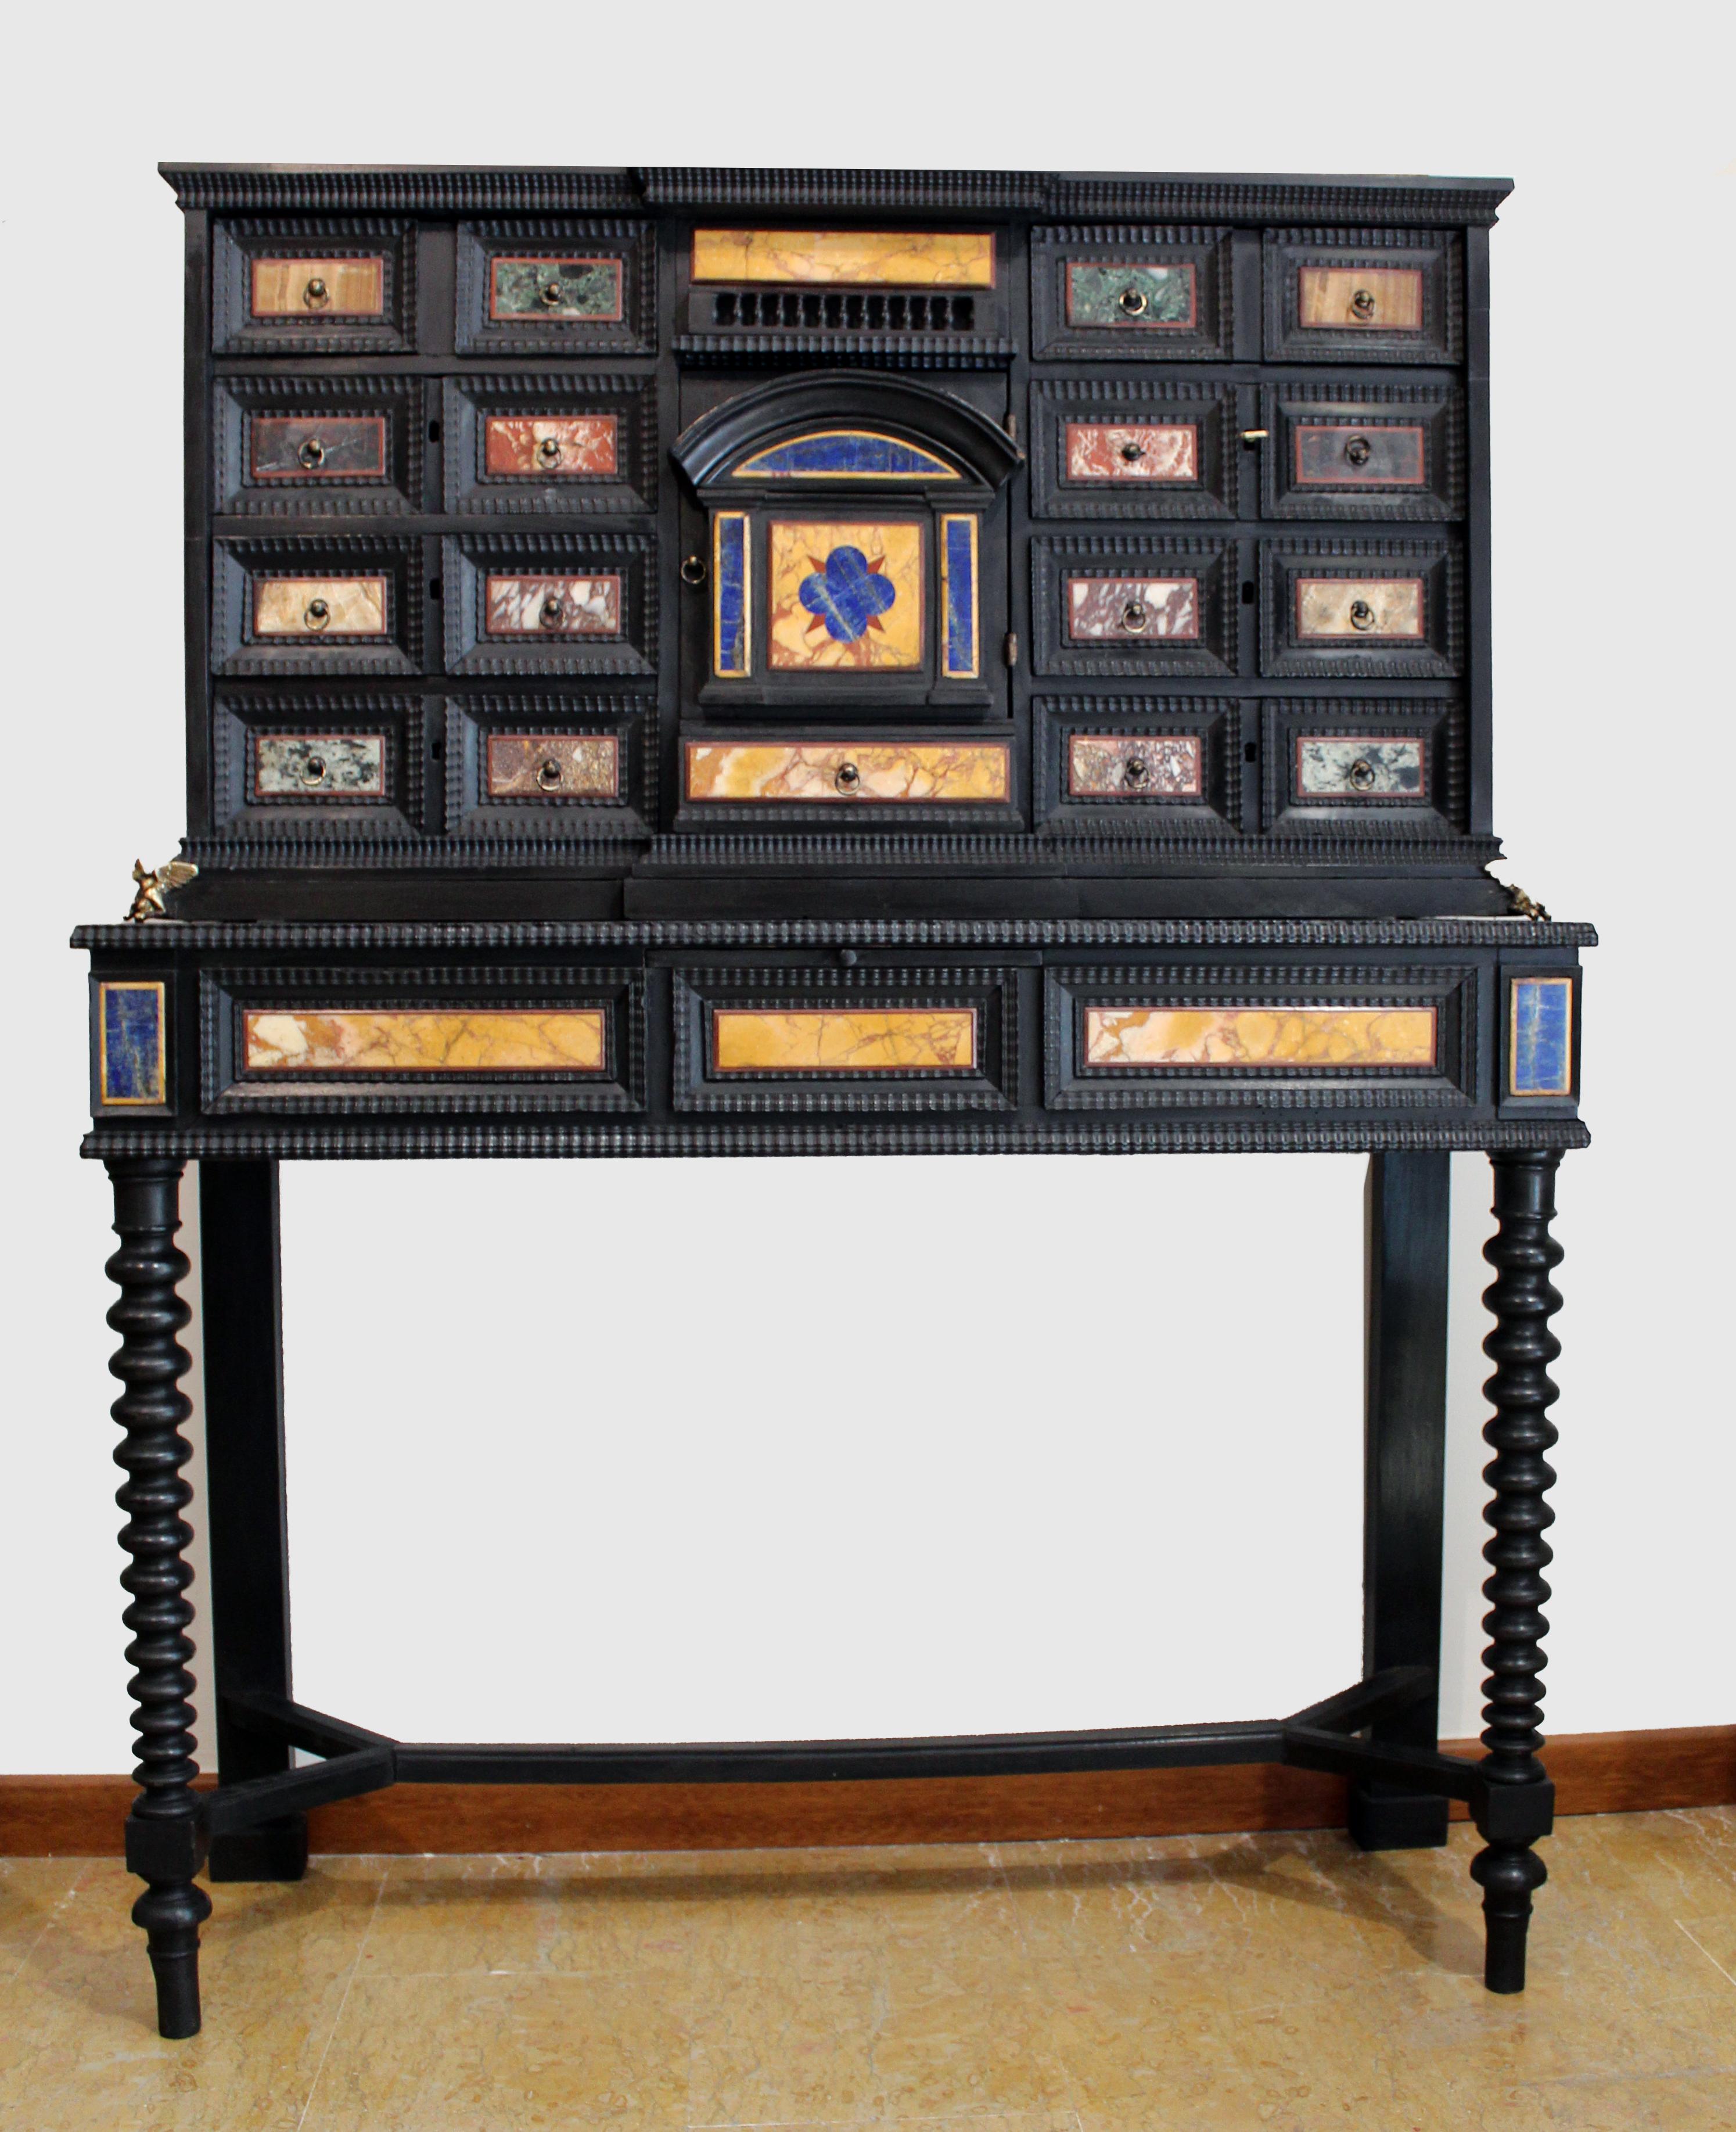 An Italian Classical Roman marble and pietra dura mounted ebony large cabinet on stand
of architectural form and inlaid overall with hardstones including Giallo Antico, Bianco and nero of Aquitania, Alabastro di Busca, lapis lazuli and